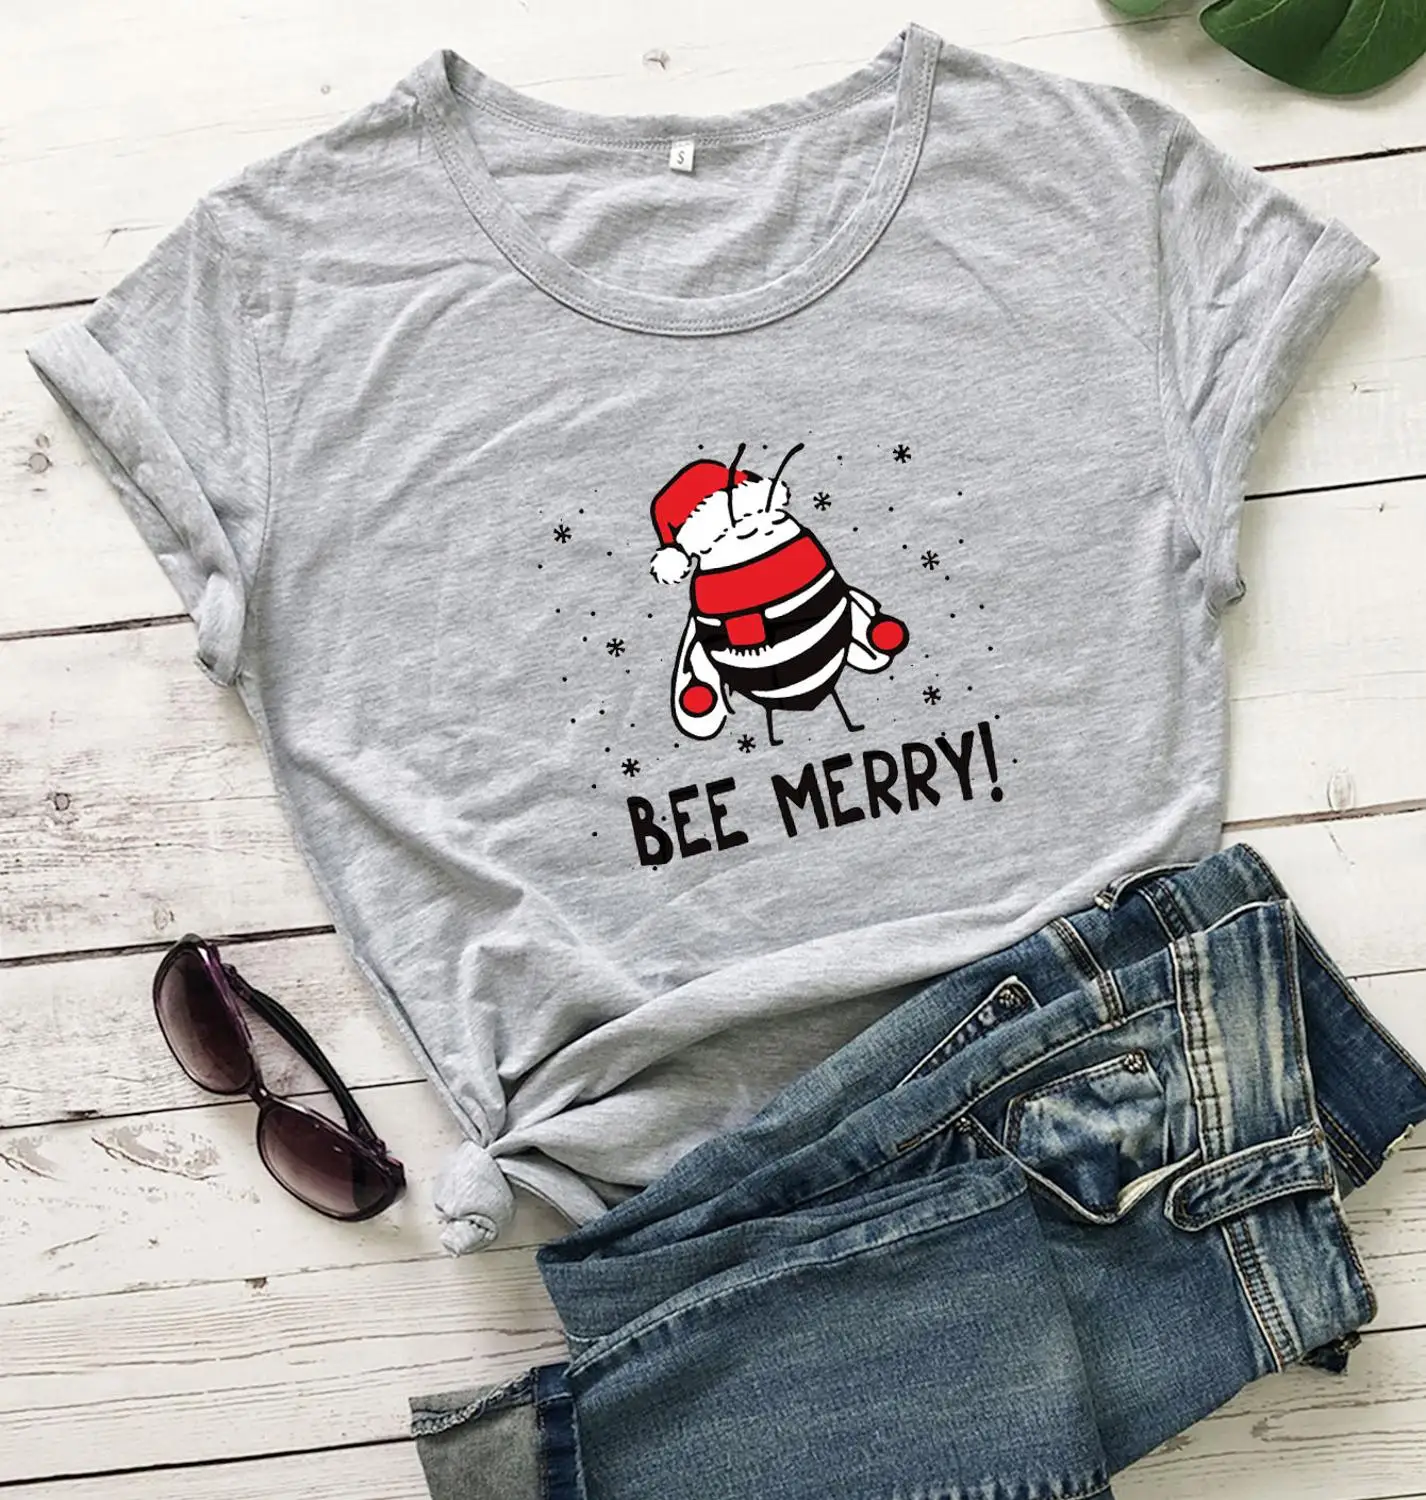 

Bee merry christmas pure cotton casual graphic cute women fashion unisex t shirt holiday gift new style hipster tees party tops